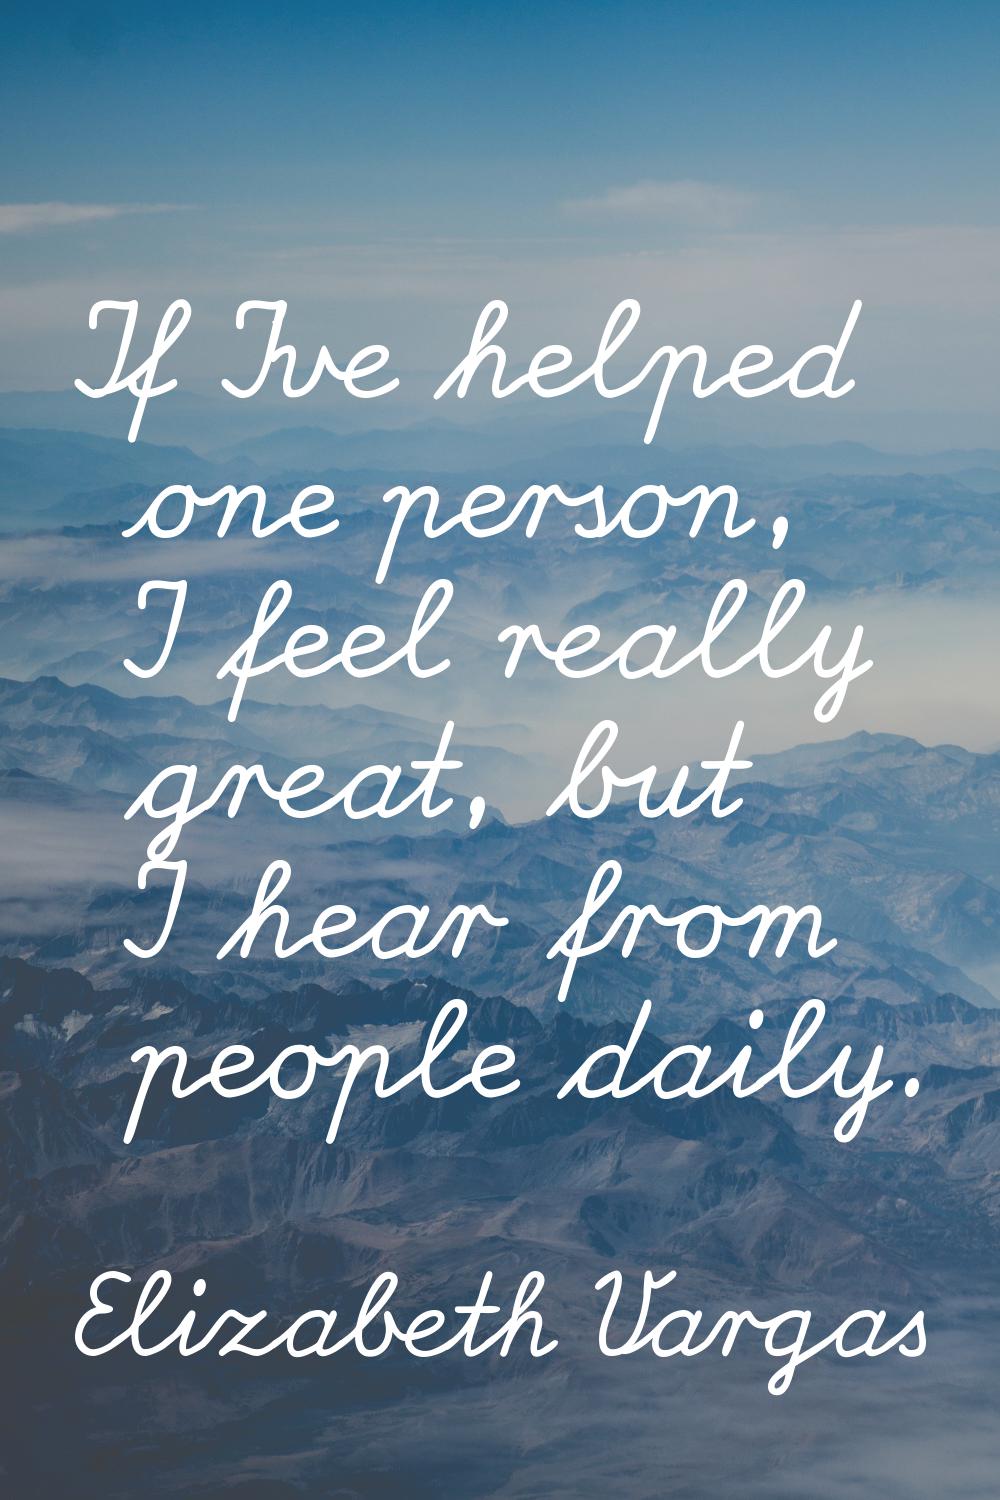 If I've helped one person, I feel really great, but I hear from people daily.